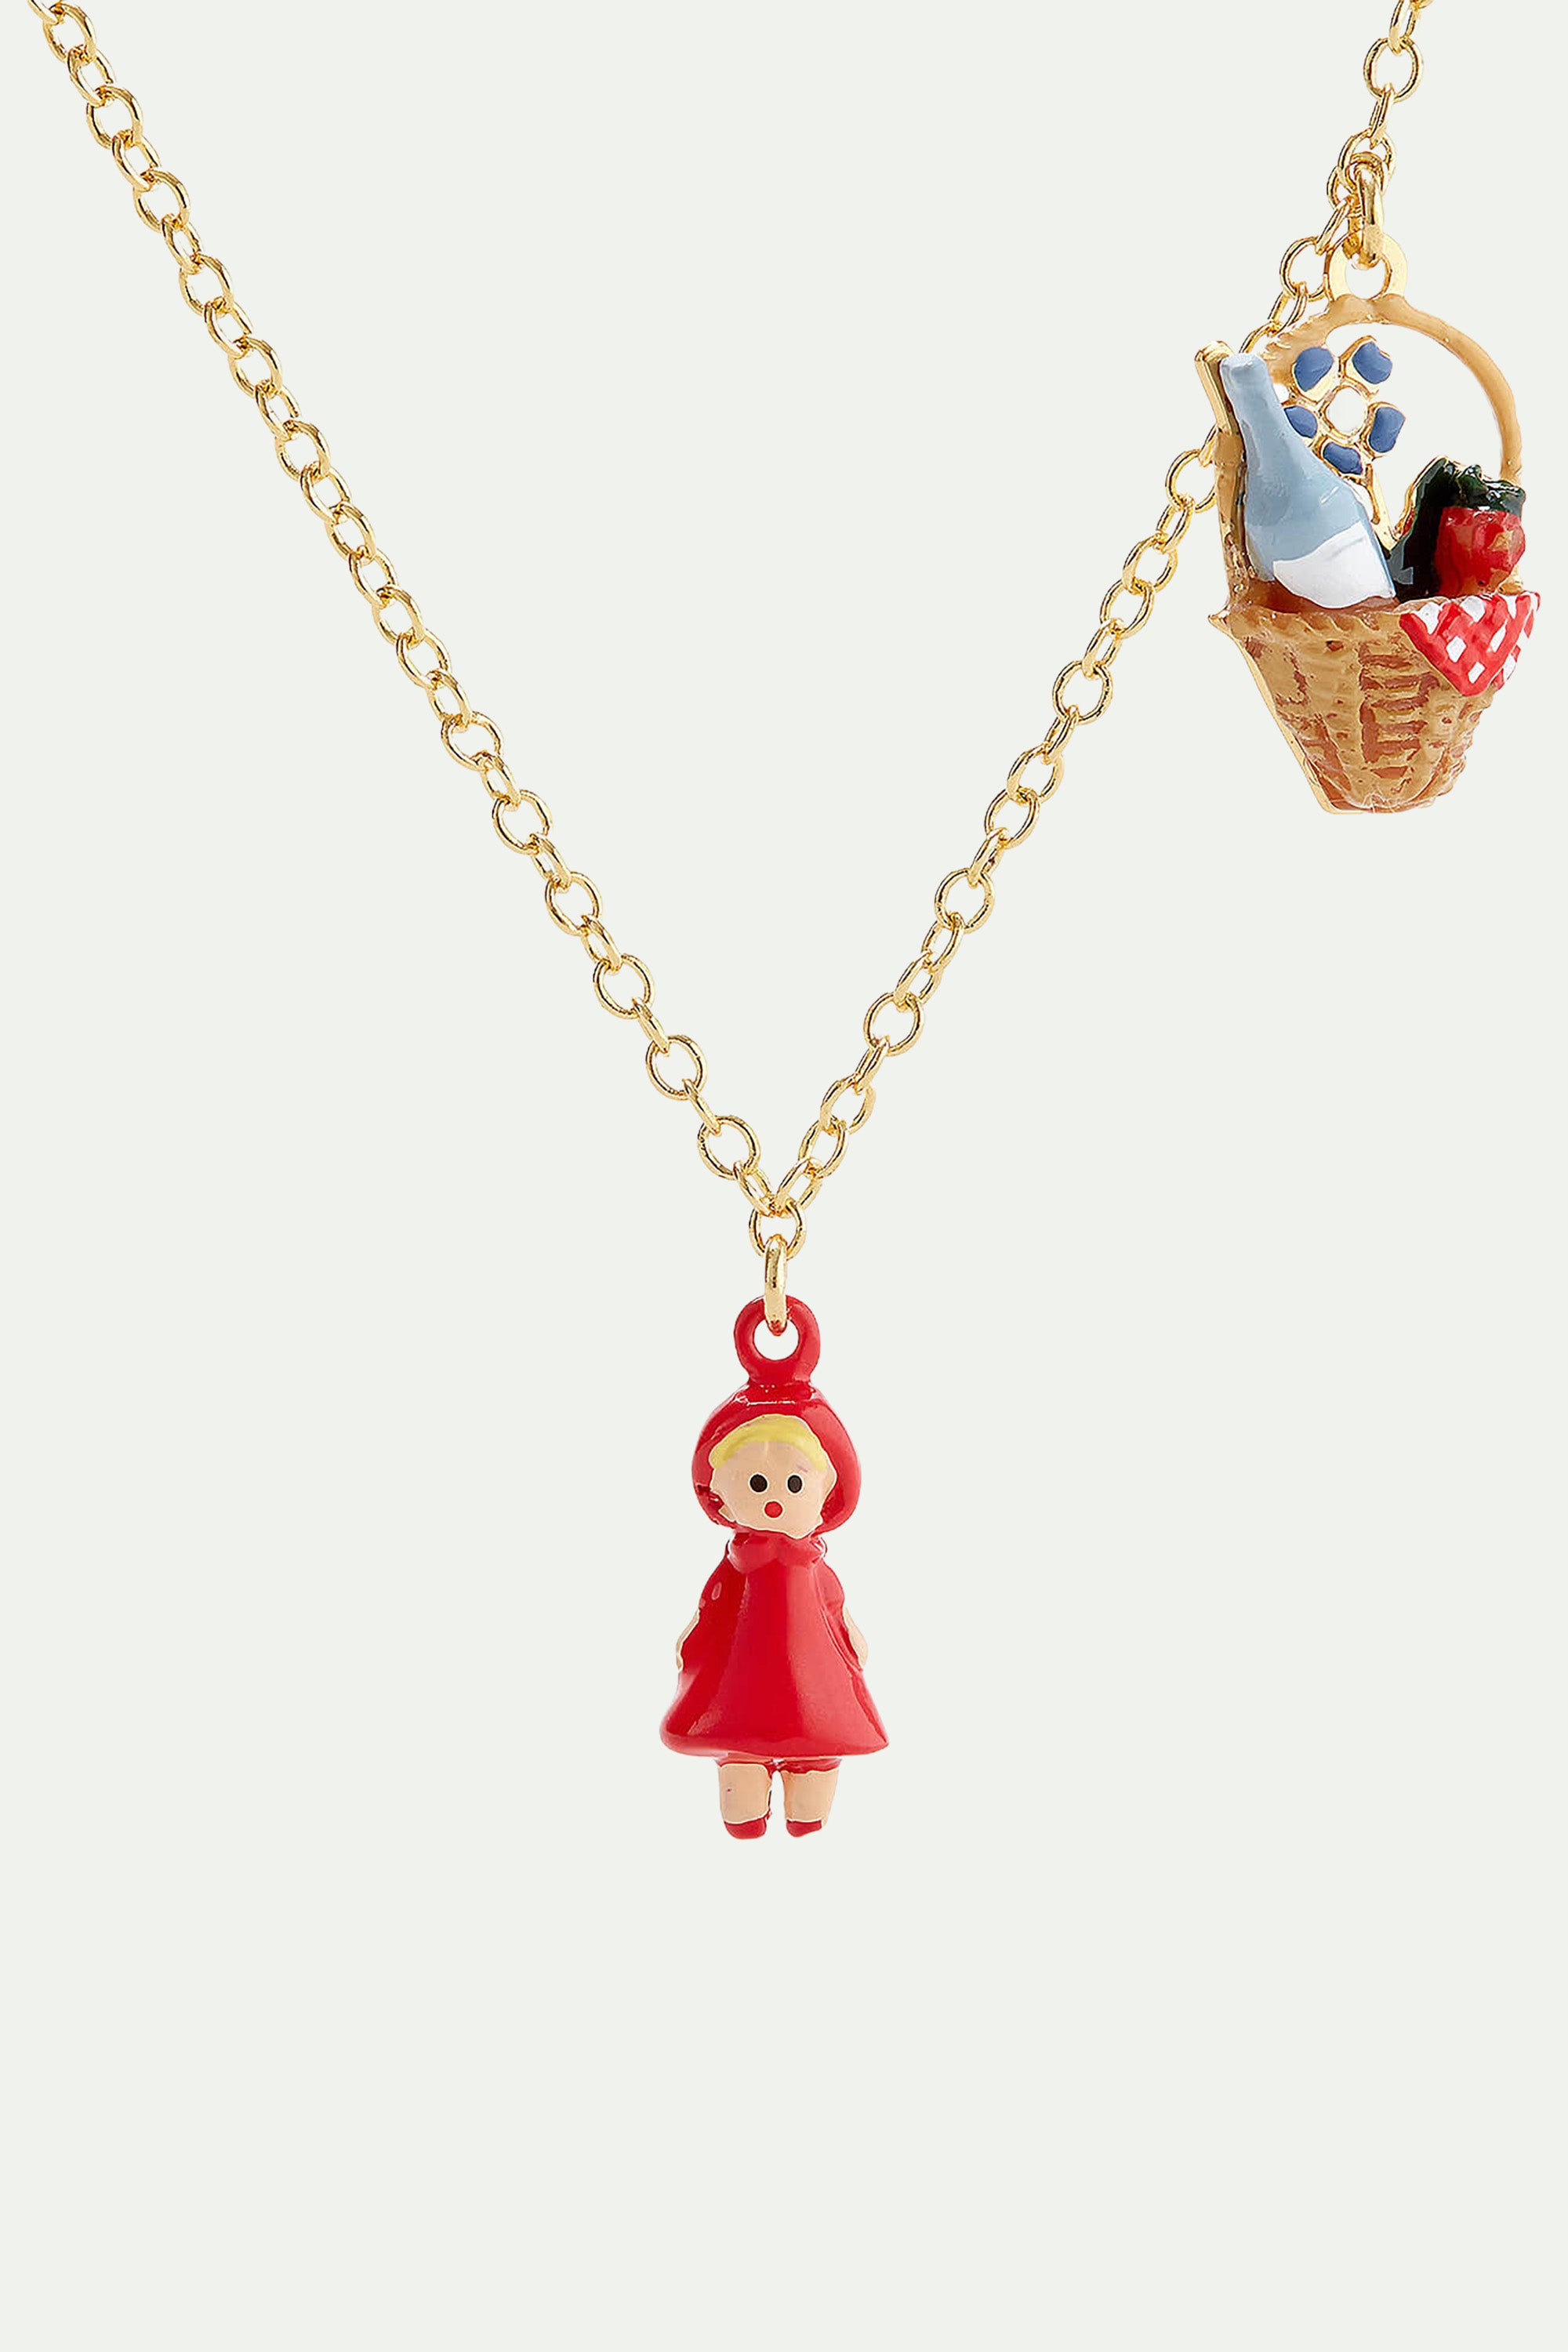 Basket and Little Red Riding Hood pendant necklace